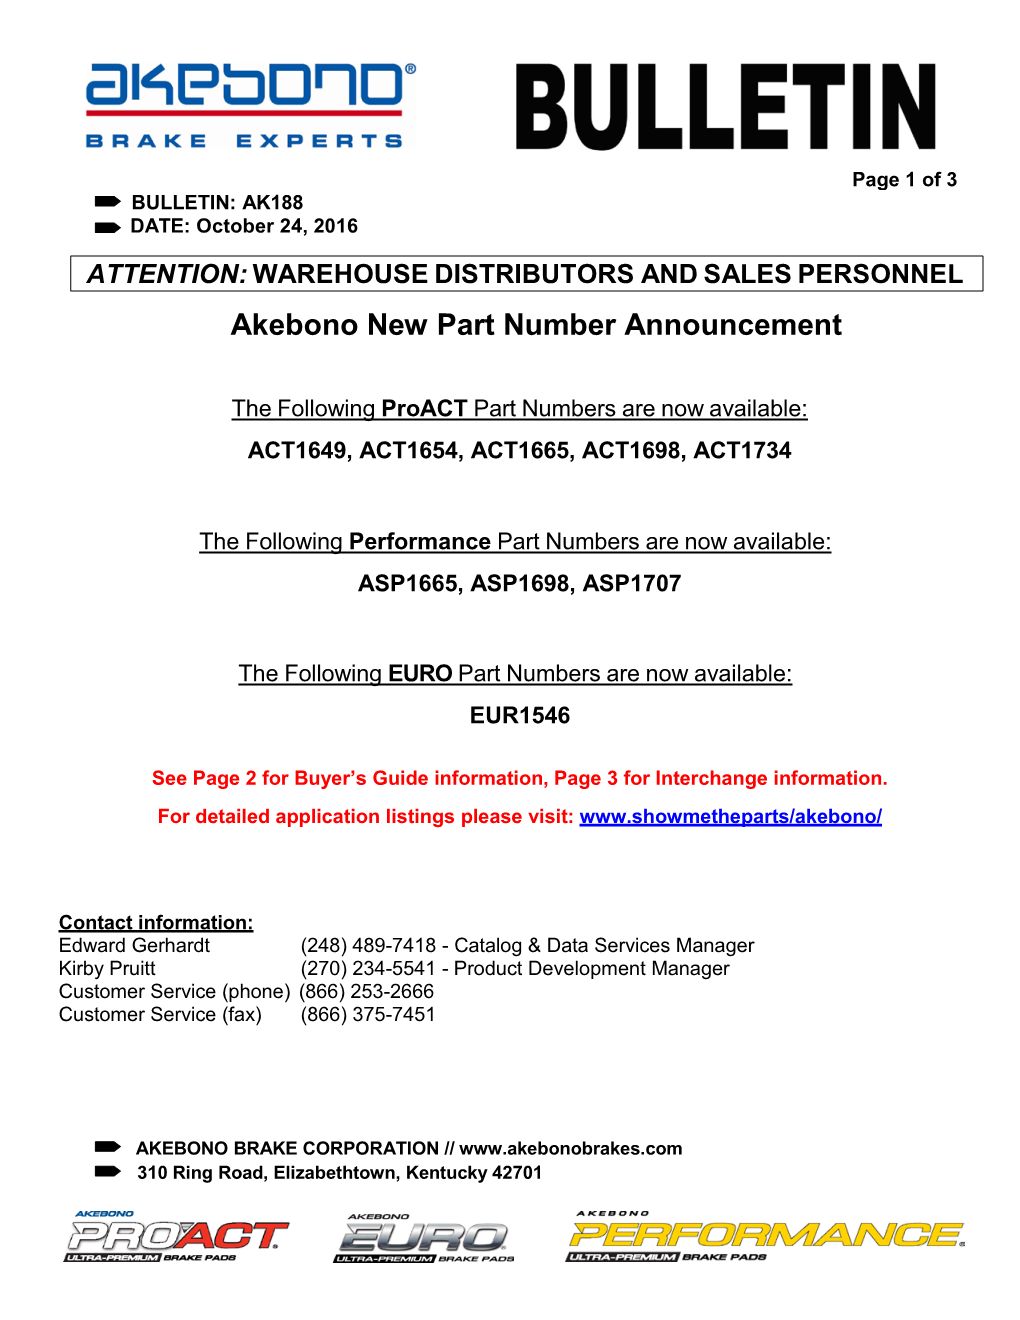 Akebono New Part Number Announcement